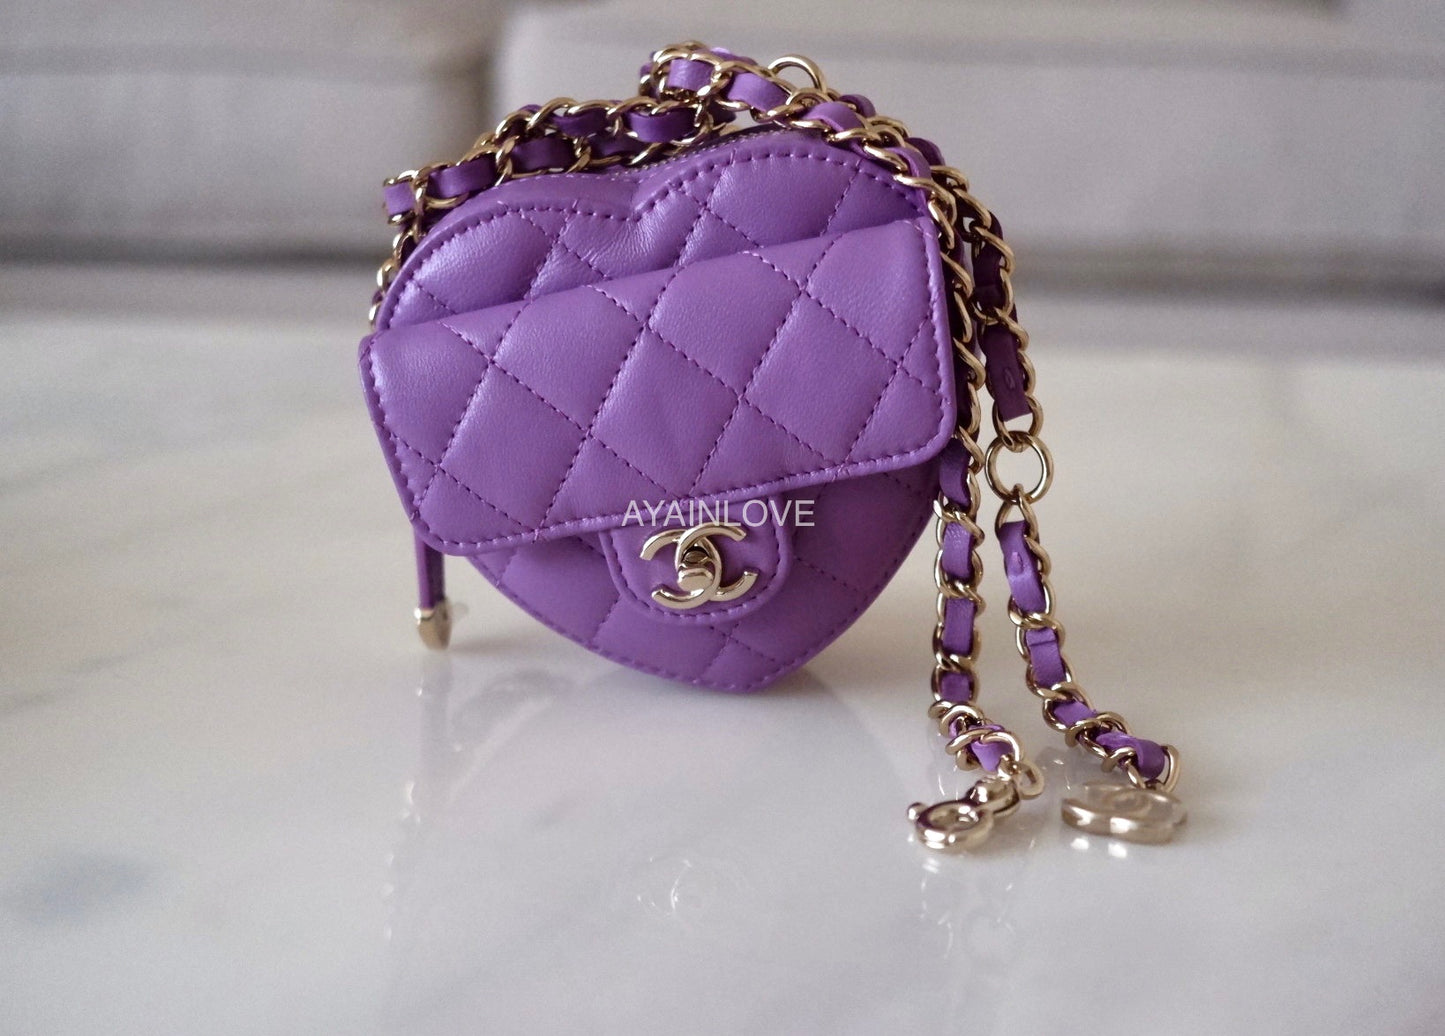 CHANEL 22S 'CC in Love' Heart Bag *New - Timeless Luxuries